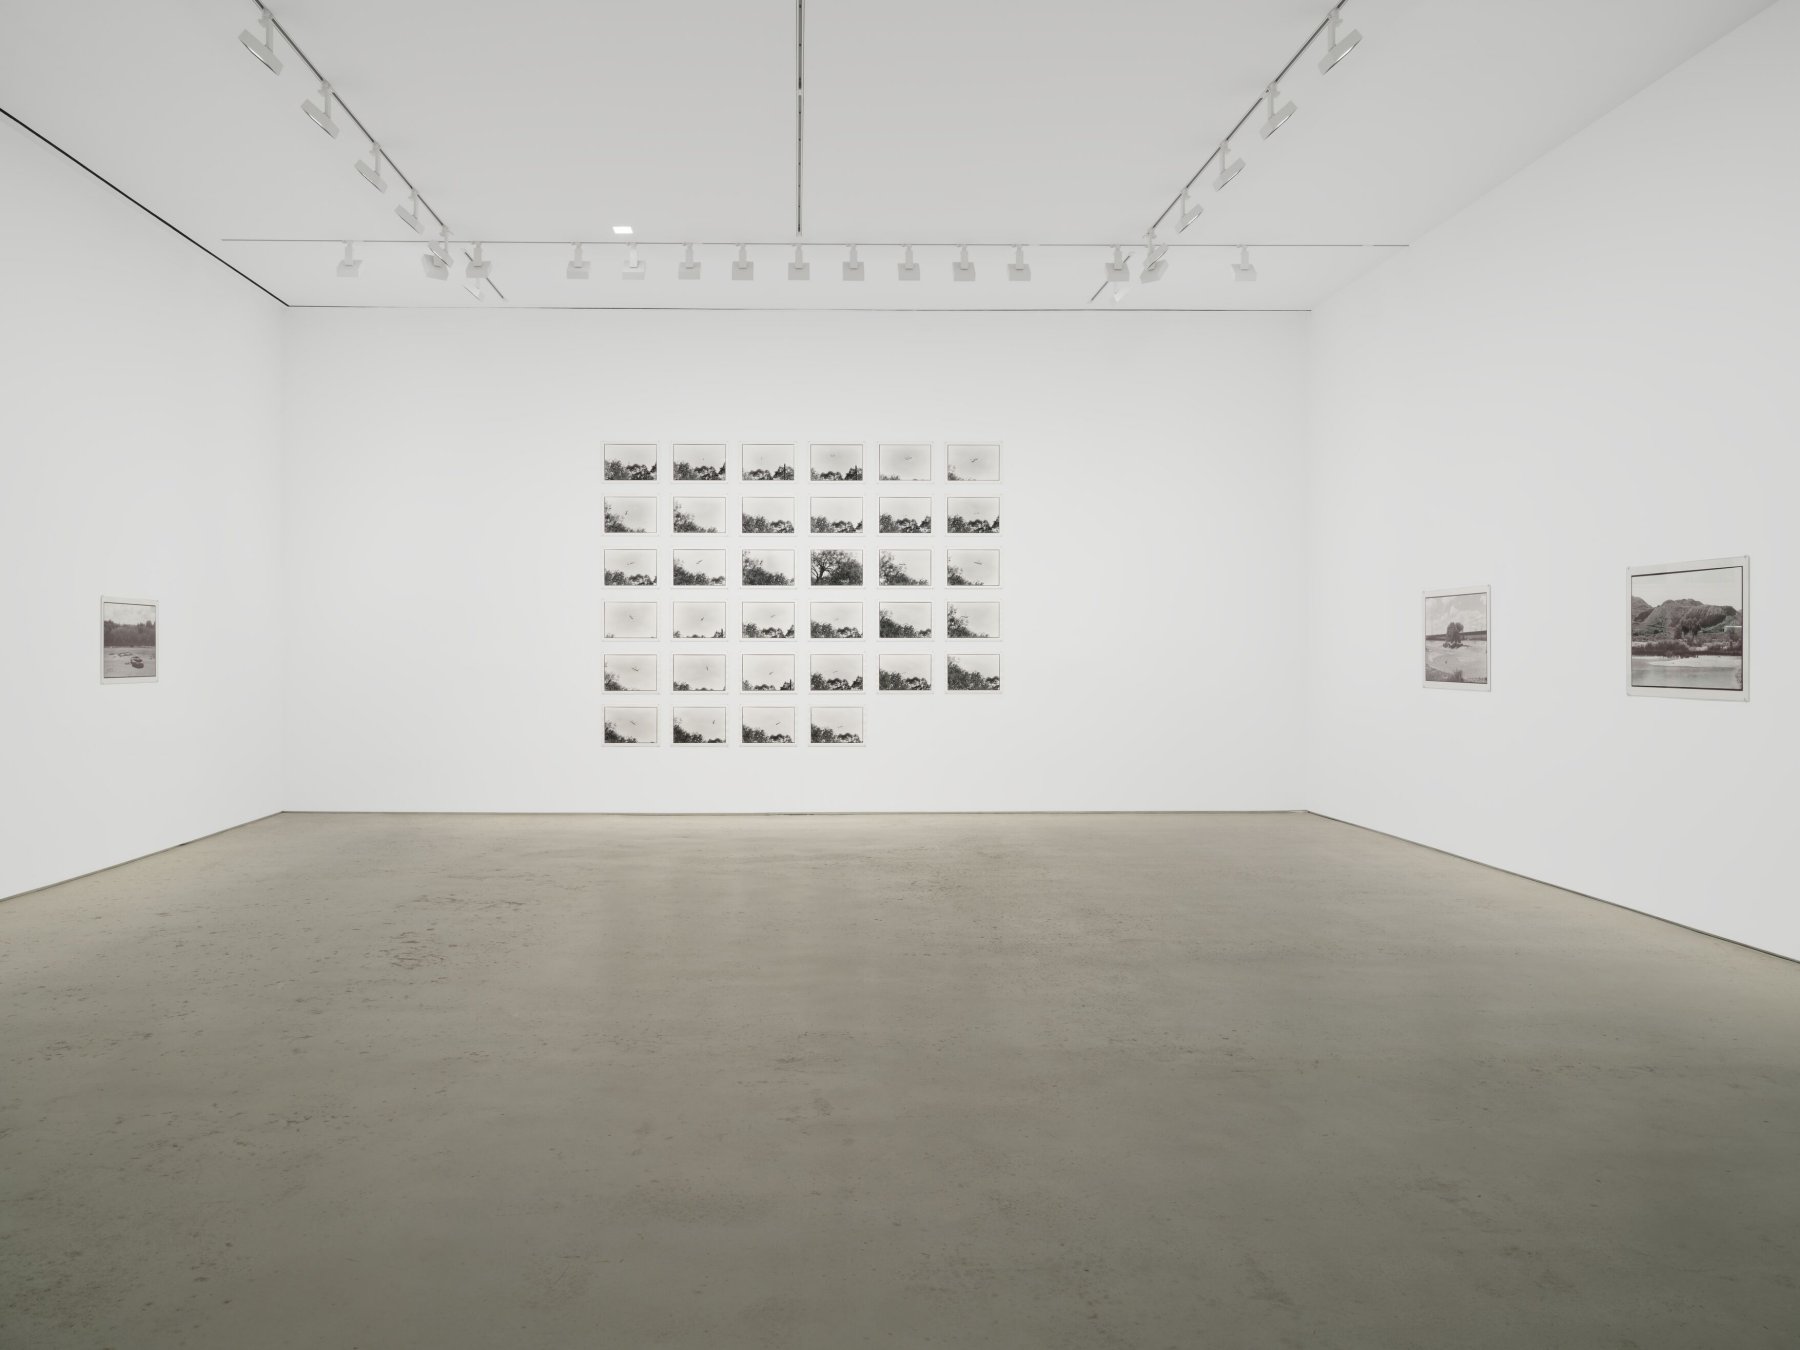 Installation image for Zoe Leonard. Excerpts from ‘Al río / To the River’, at Hauser & Wirth